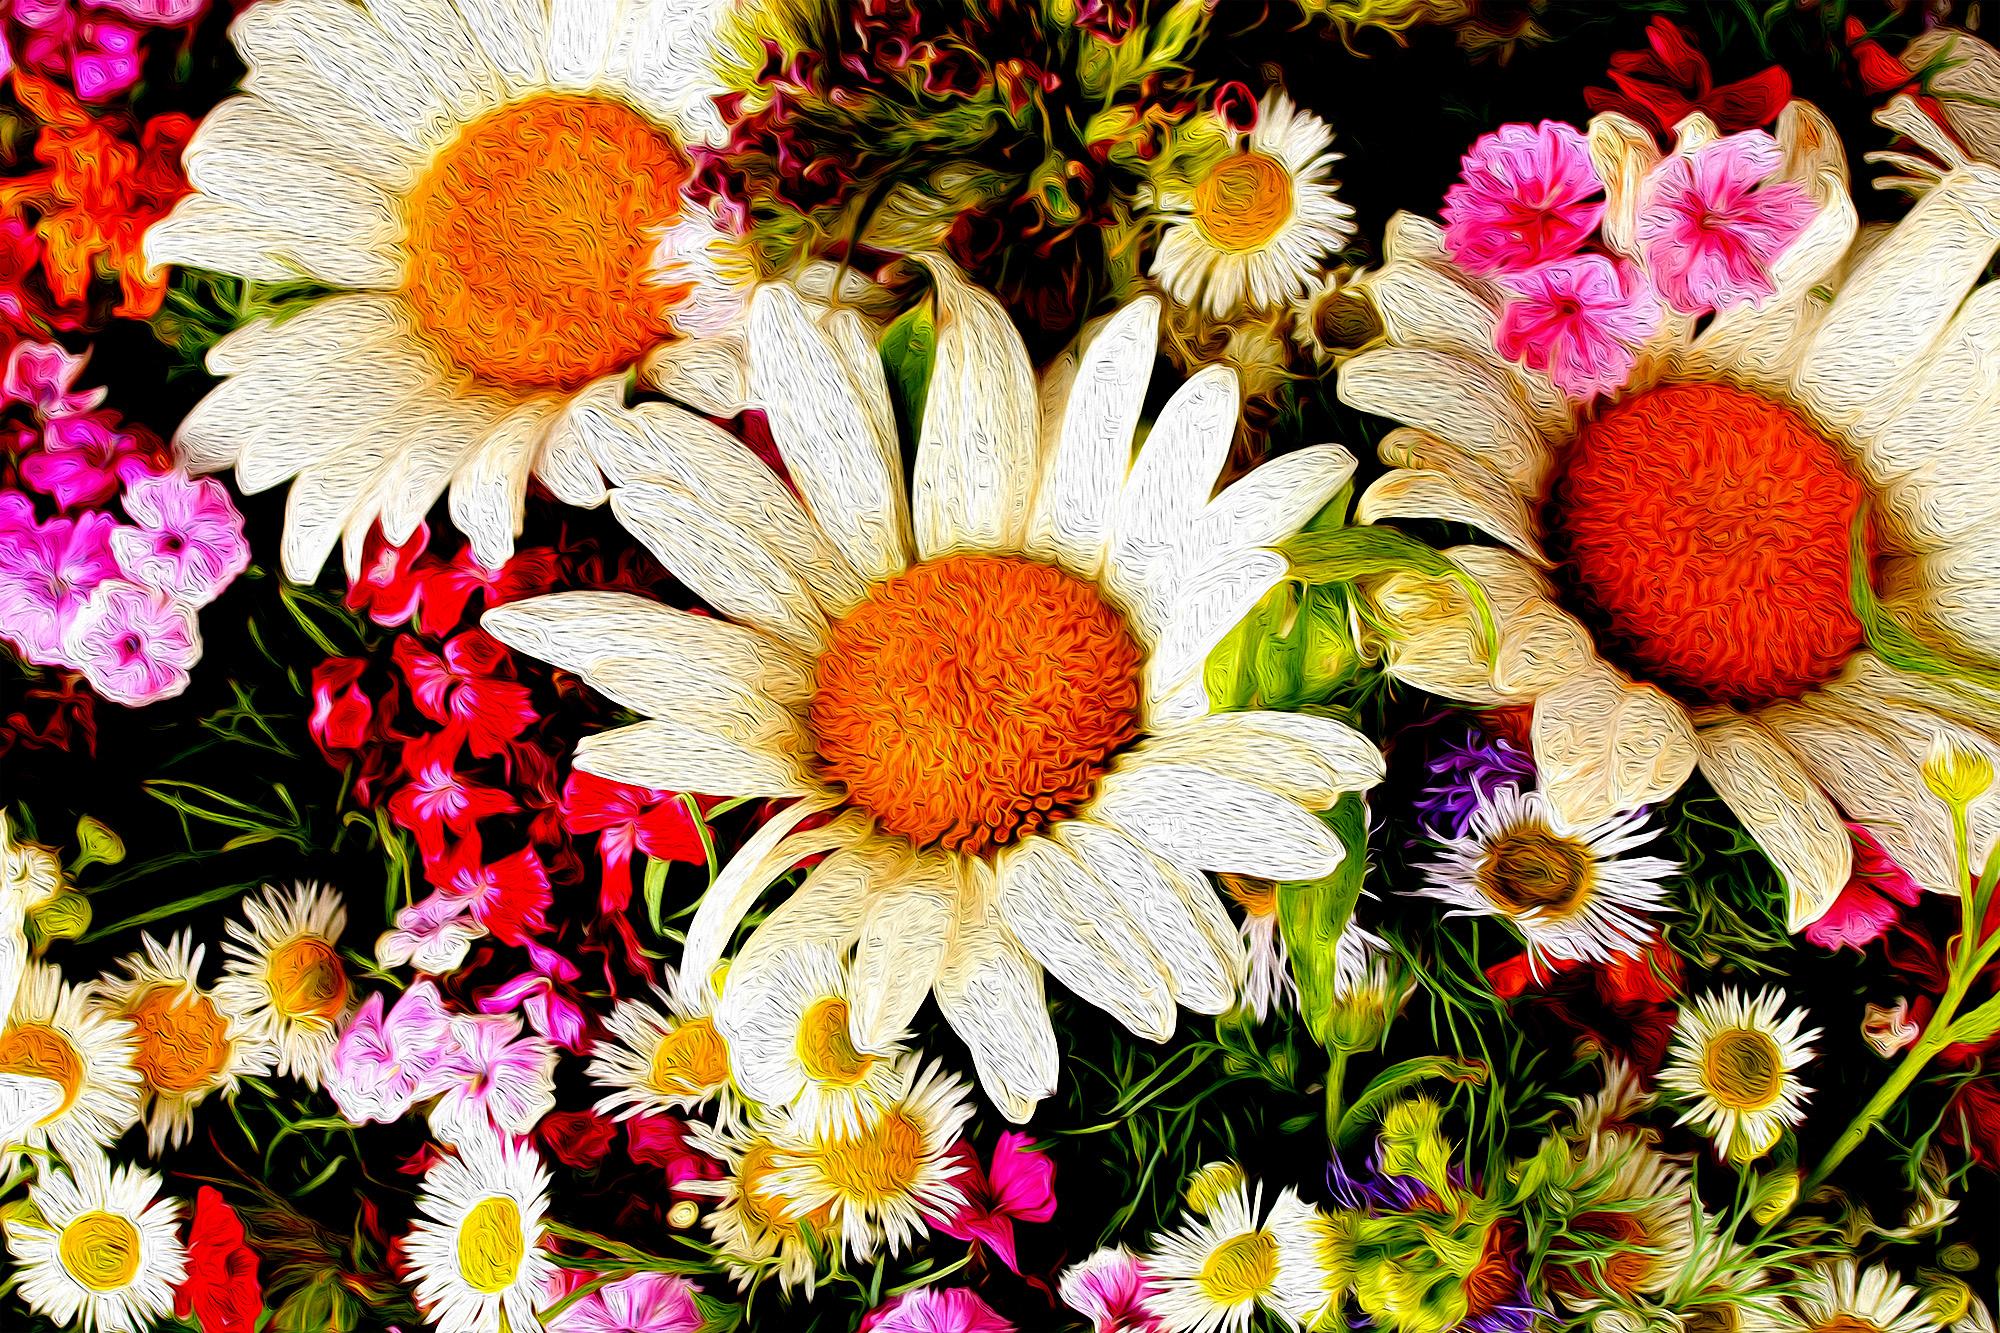 daisies and wildflowers, stylized to look painted, fill the image